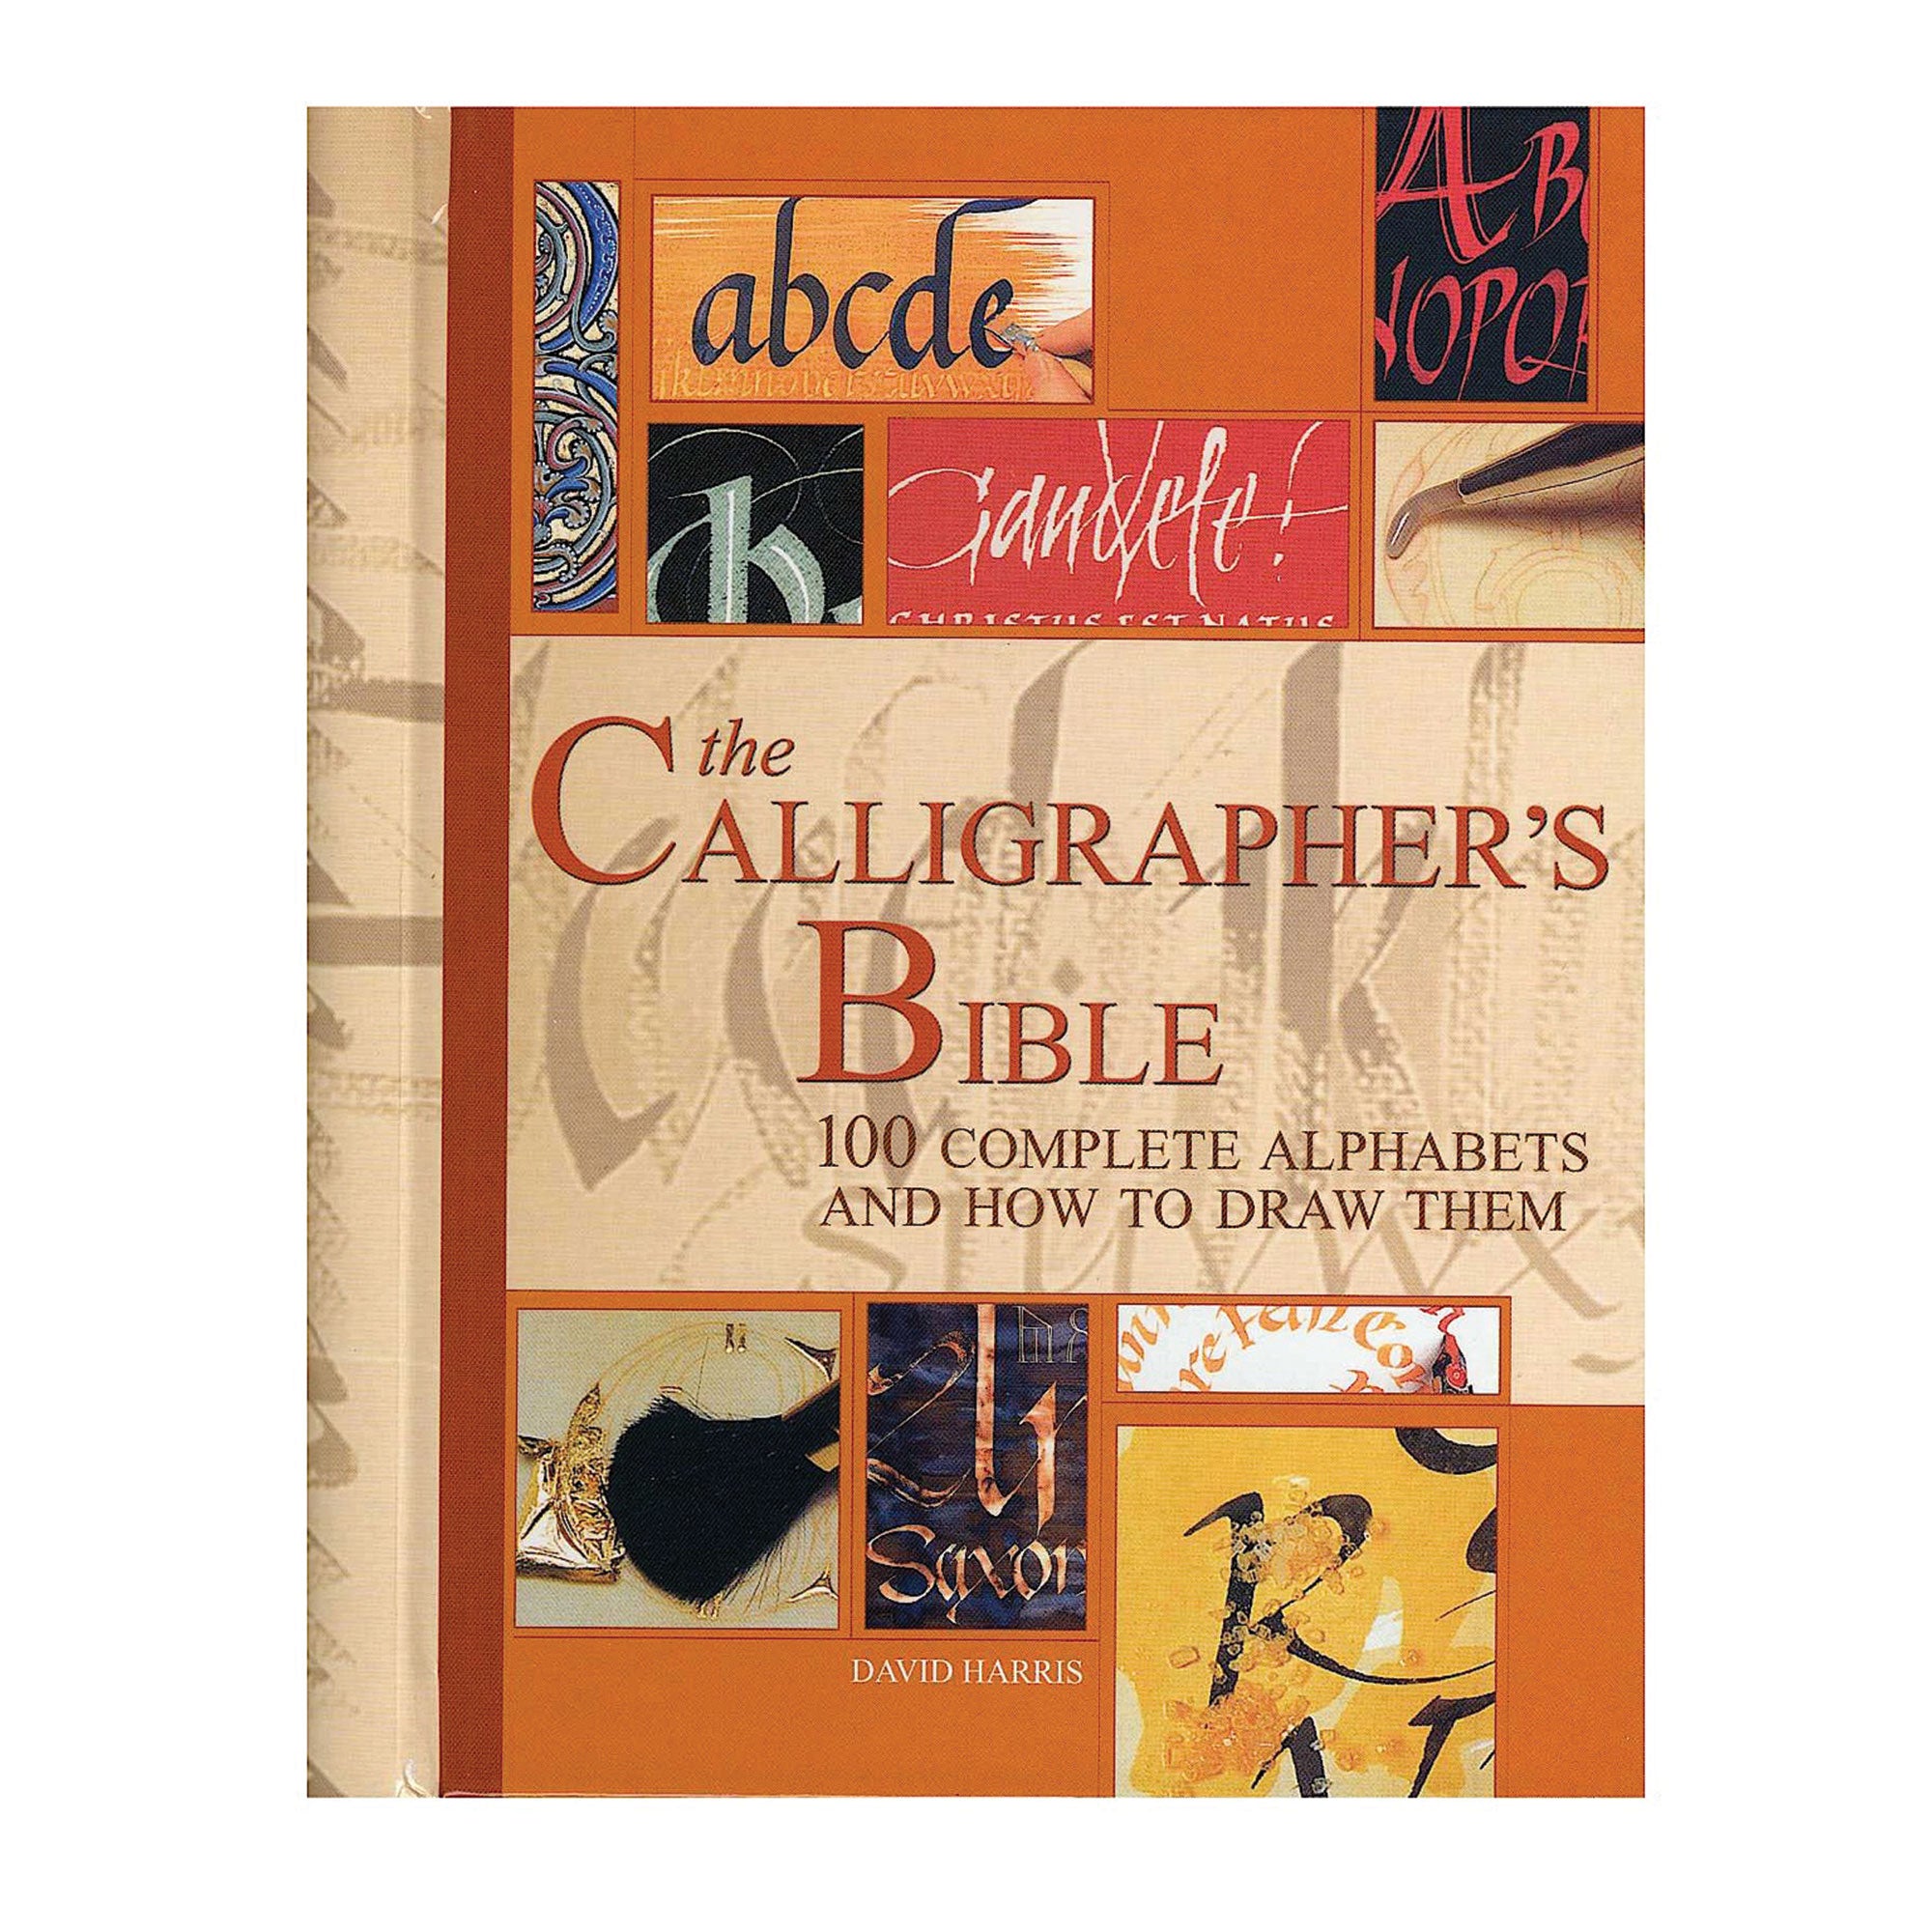 The Calligrapher's Bible - 100 Complete Alphabets and How To Draw Them